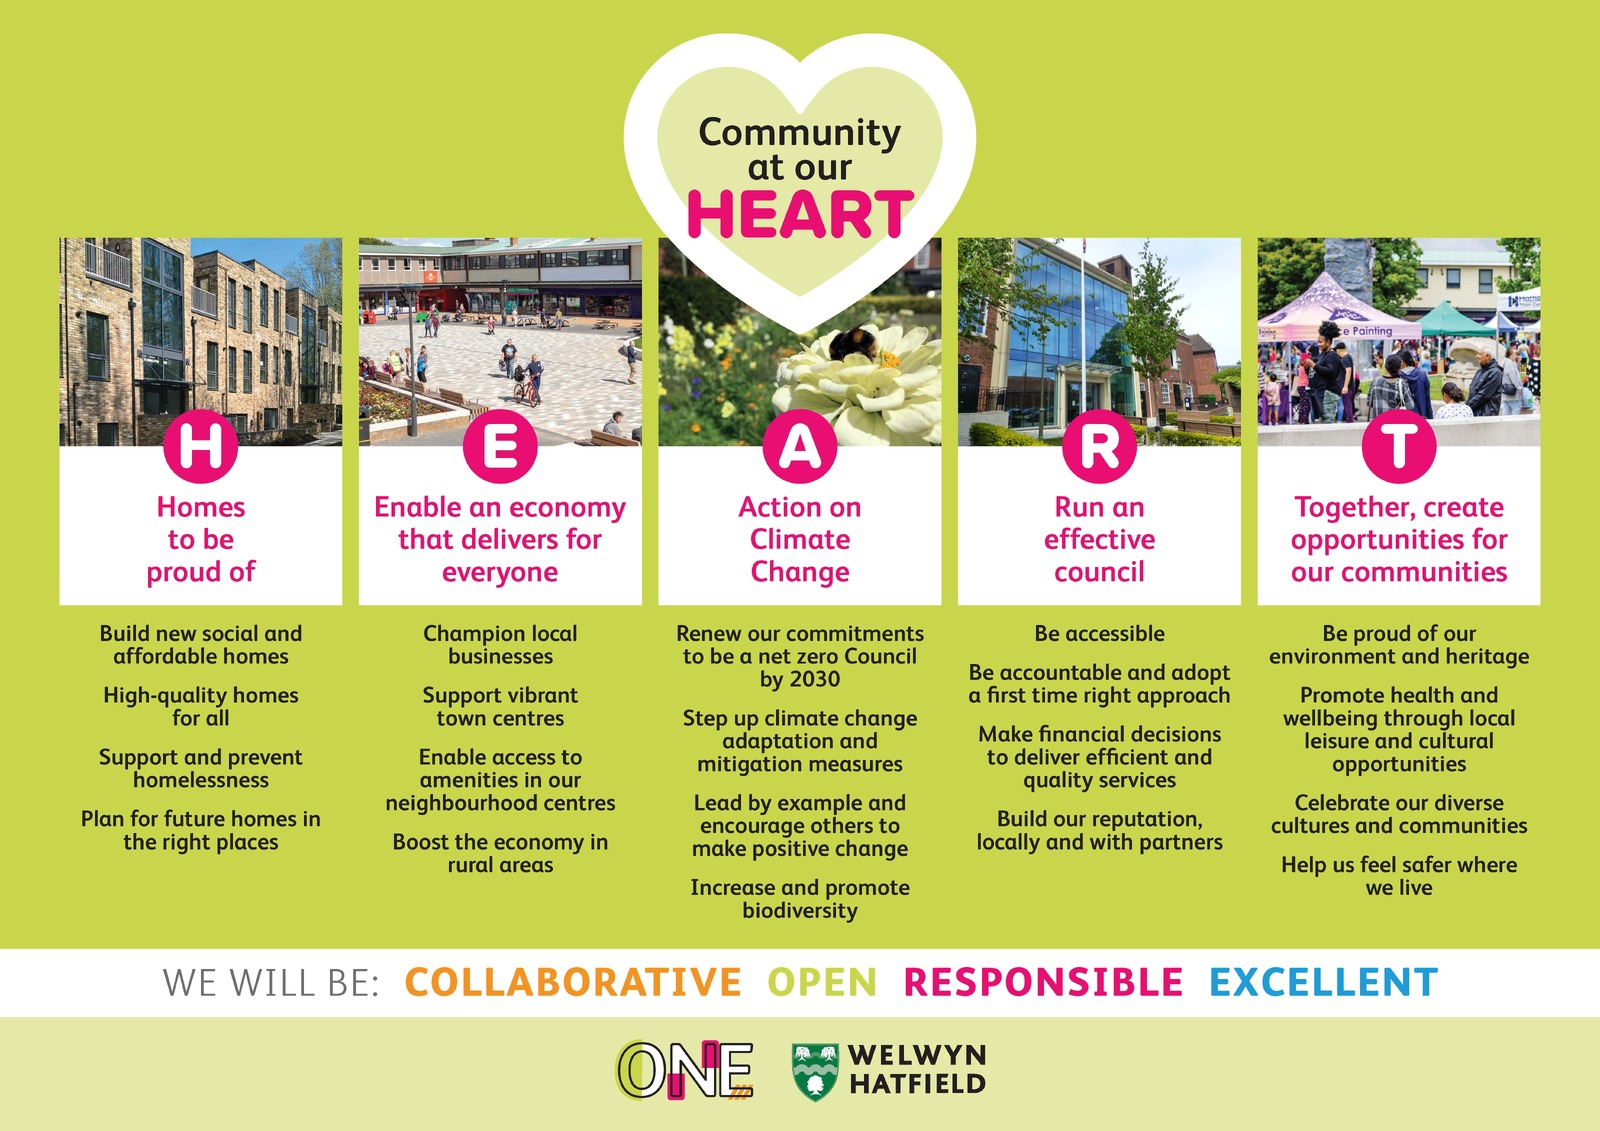 Graphic of our 'heart' priorities which are: homes to be proud of, enable an economy that delivers for everyone, action on climate change, run an effective council and together, create opportunities for our communities.